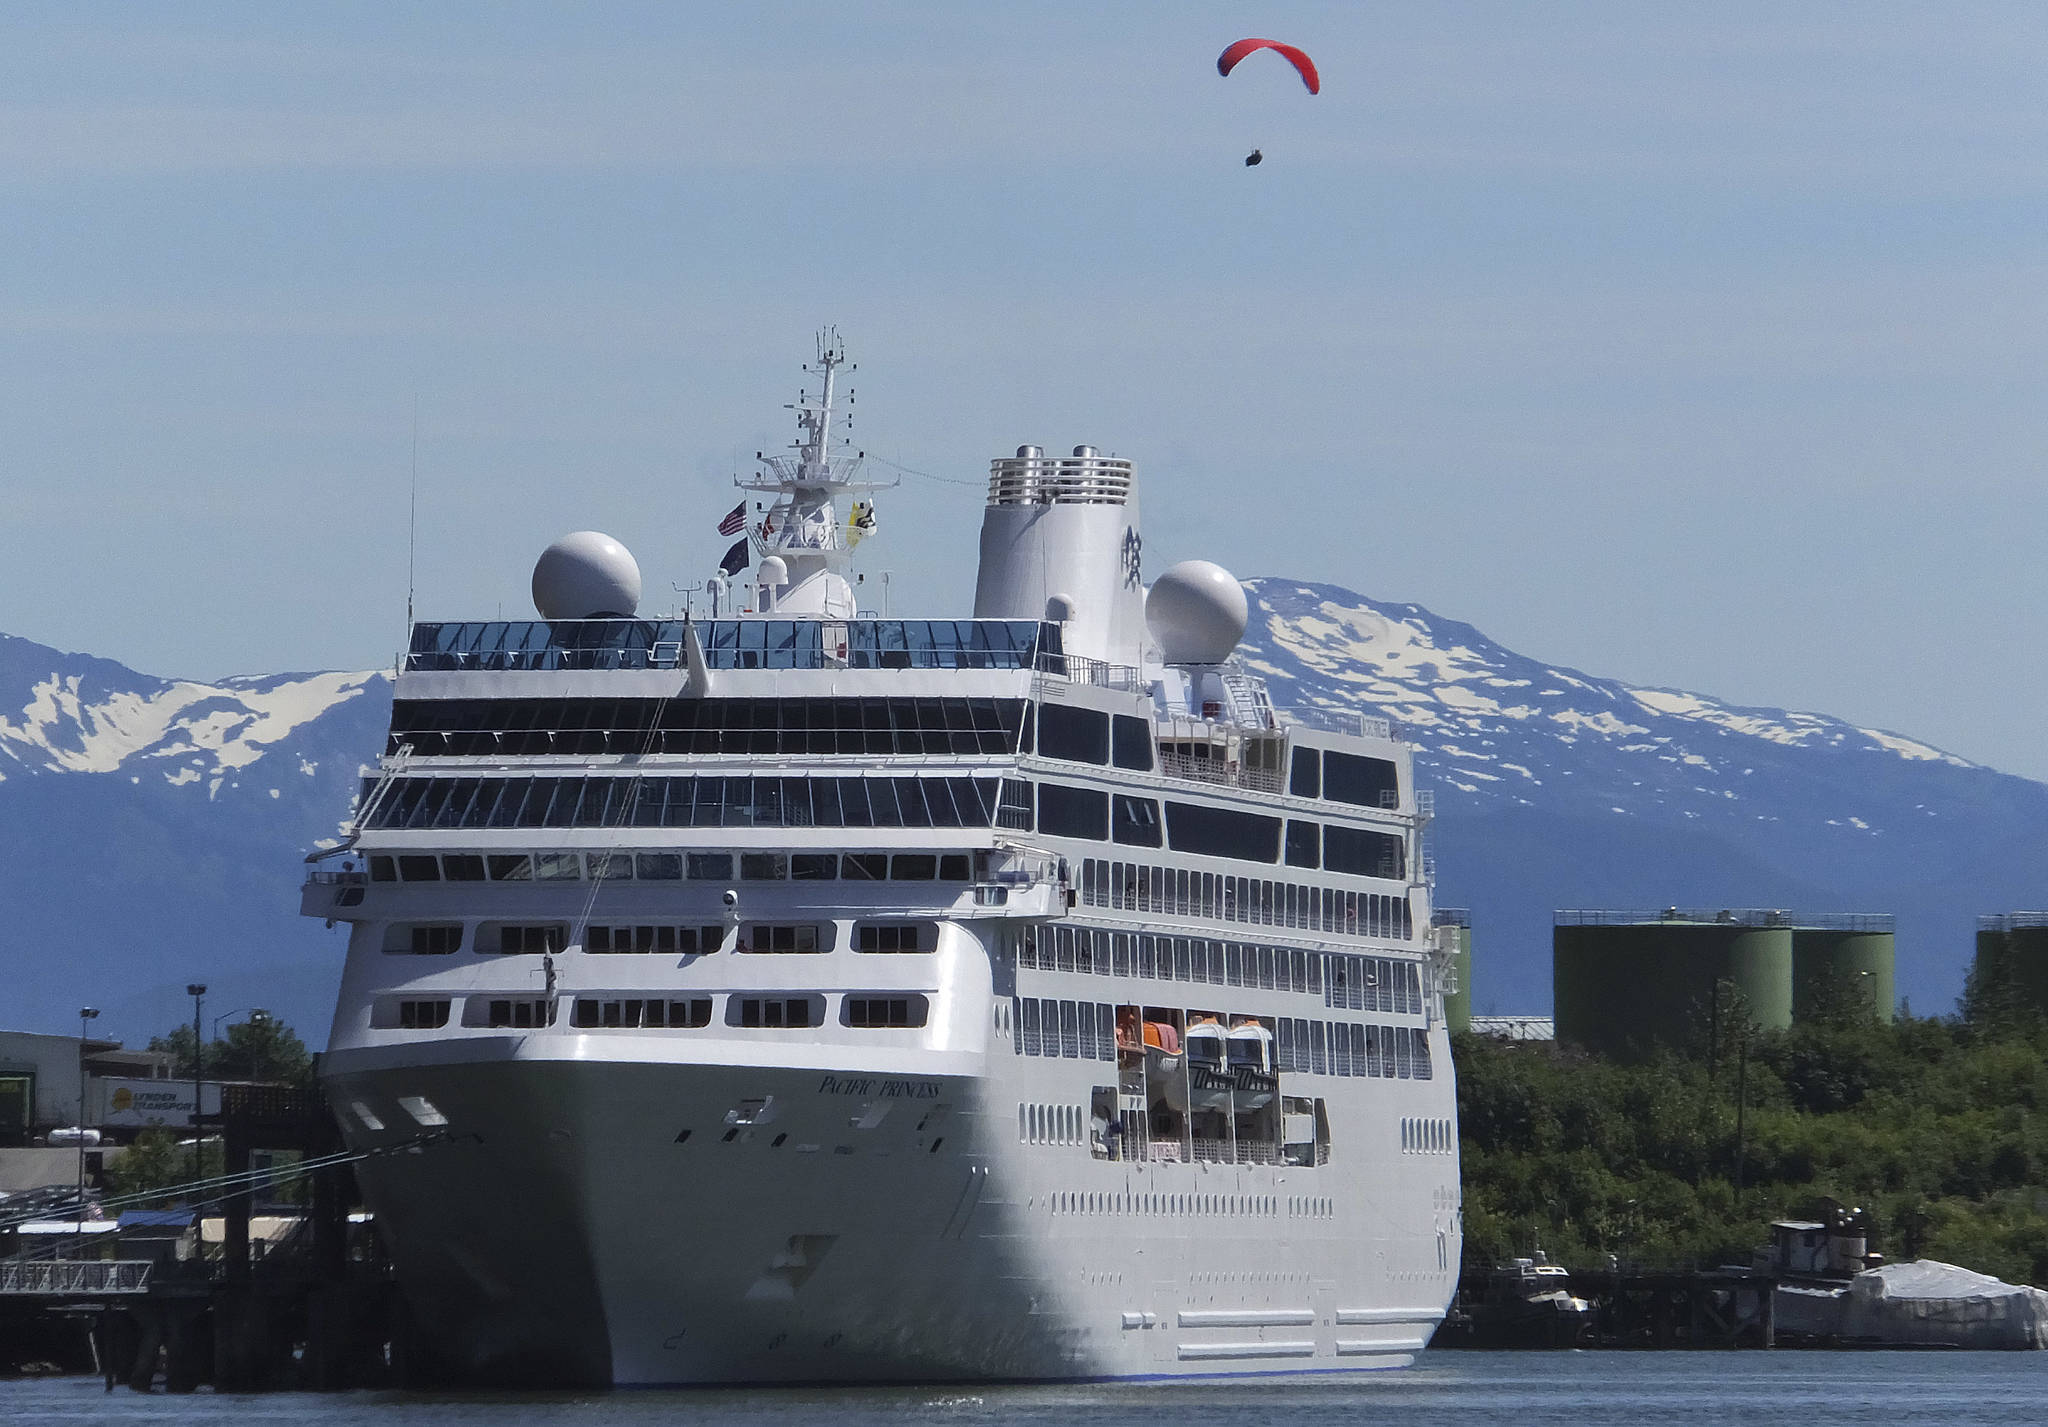 This June 26, 2014, file photo, shows a cruise ship docked in Juneau, while a paraglider soars above. The tax bill approved Saturday by the U.S. Senate will open part of the Arctic National Wildlife Refuge to oil and gas drilling. The measure also struck down a proposed cruise ship tax that Republican Sen. Lisa Murkowski said would have disproportionately affected her state. (AP Photo/Becky Bohrer, File)